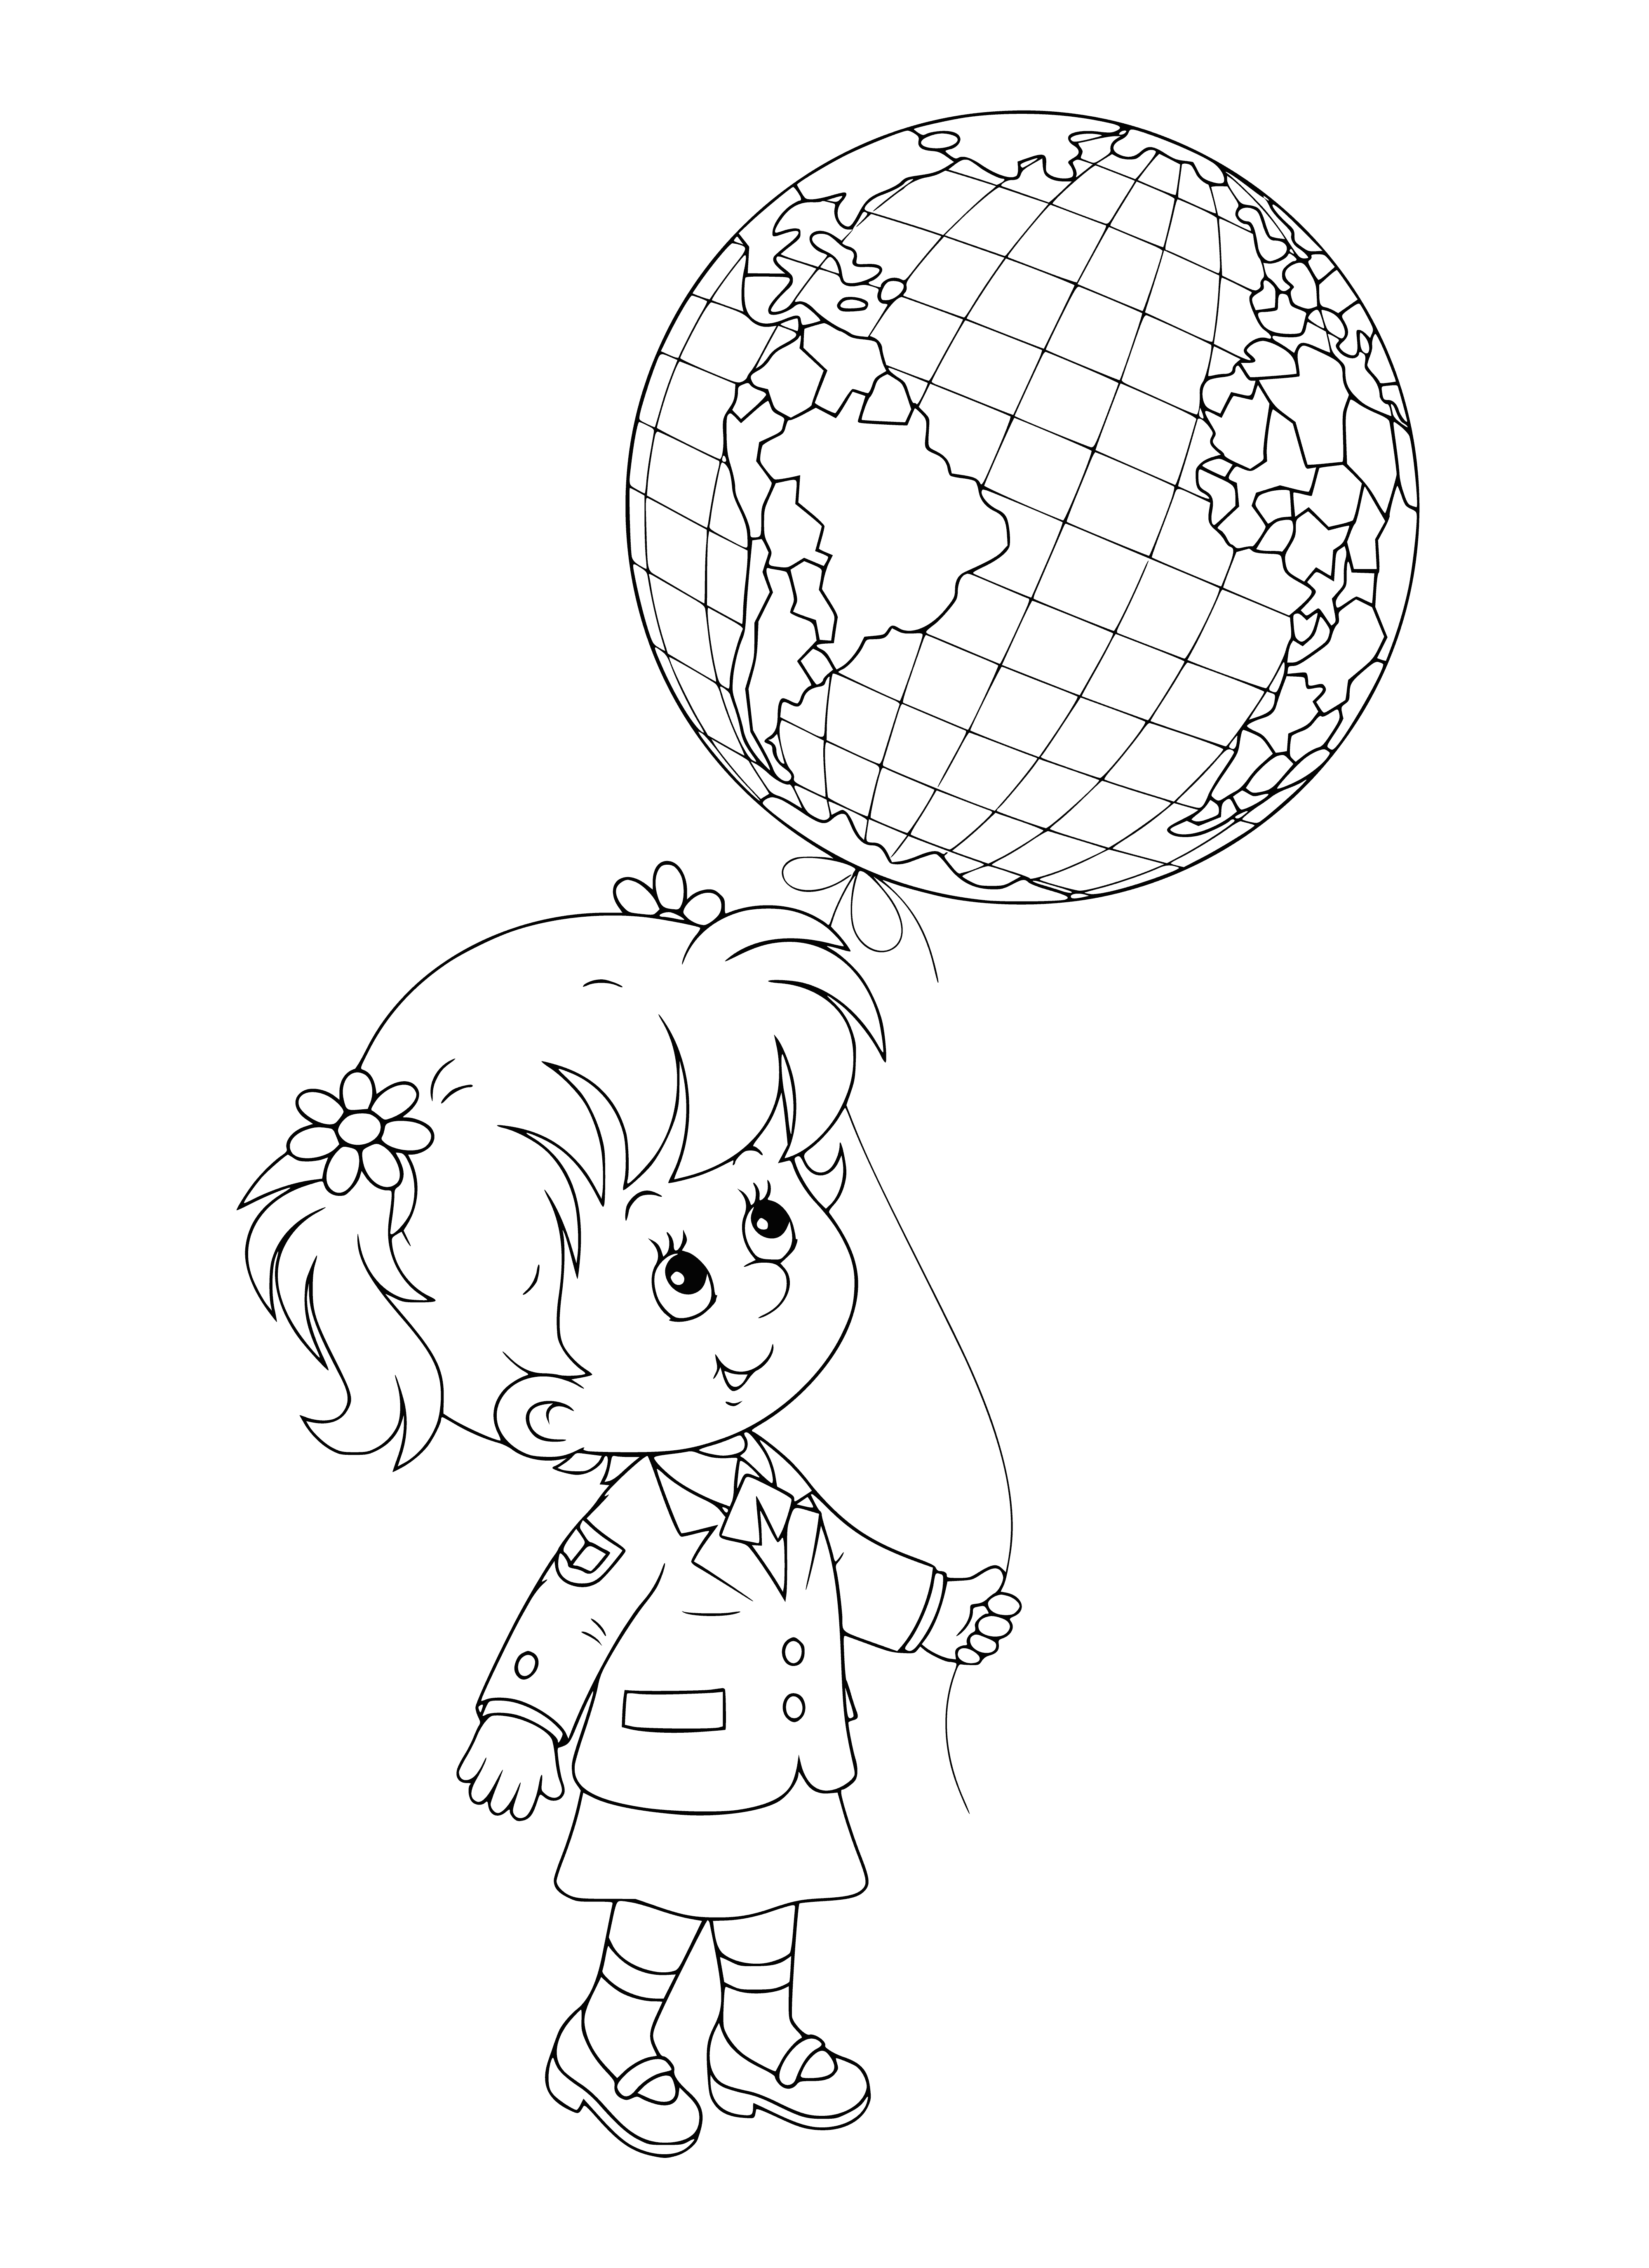 coloring page: Russian schools celebrate Knowledge Day on Sept. 1. Students wear smart clothes and carry flowers, they hear speeches and start lessons. It's a day of new beginnings and possibilities, filled with laughter and learning. #KnowledgeDay